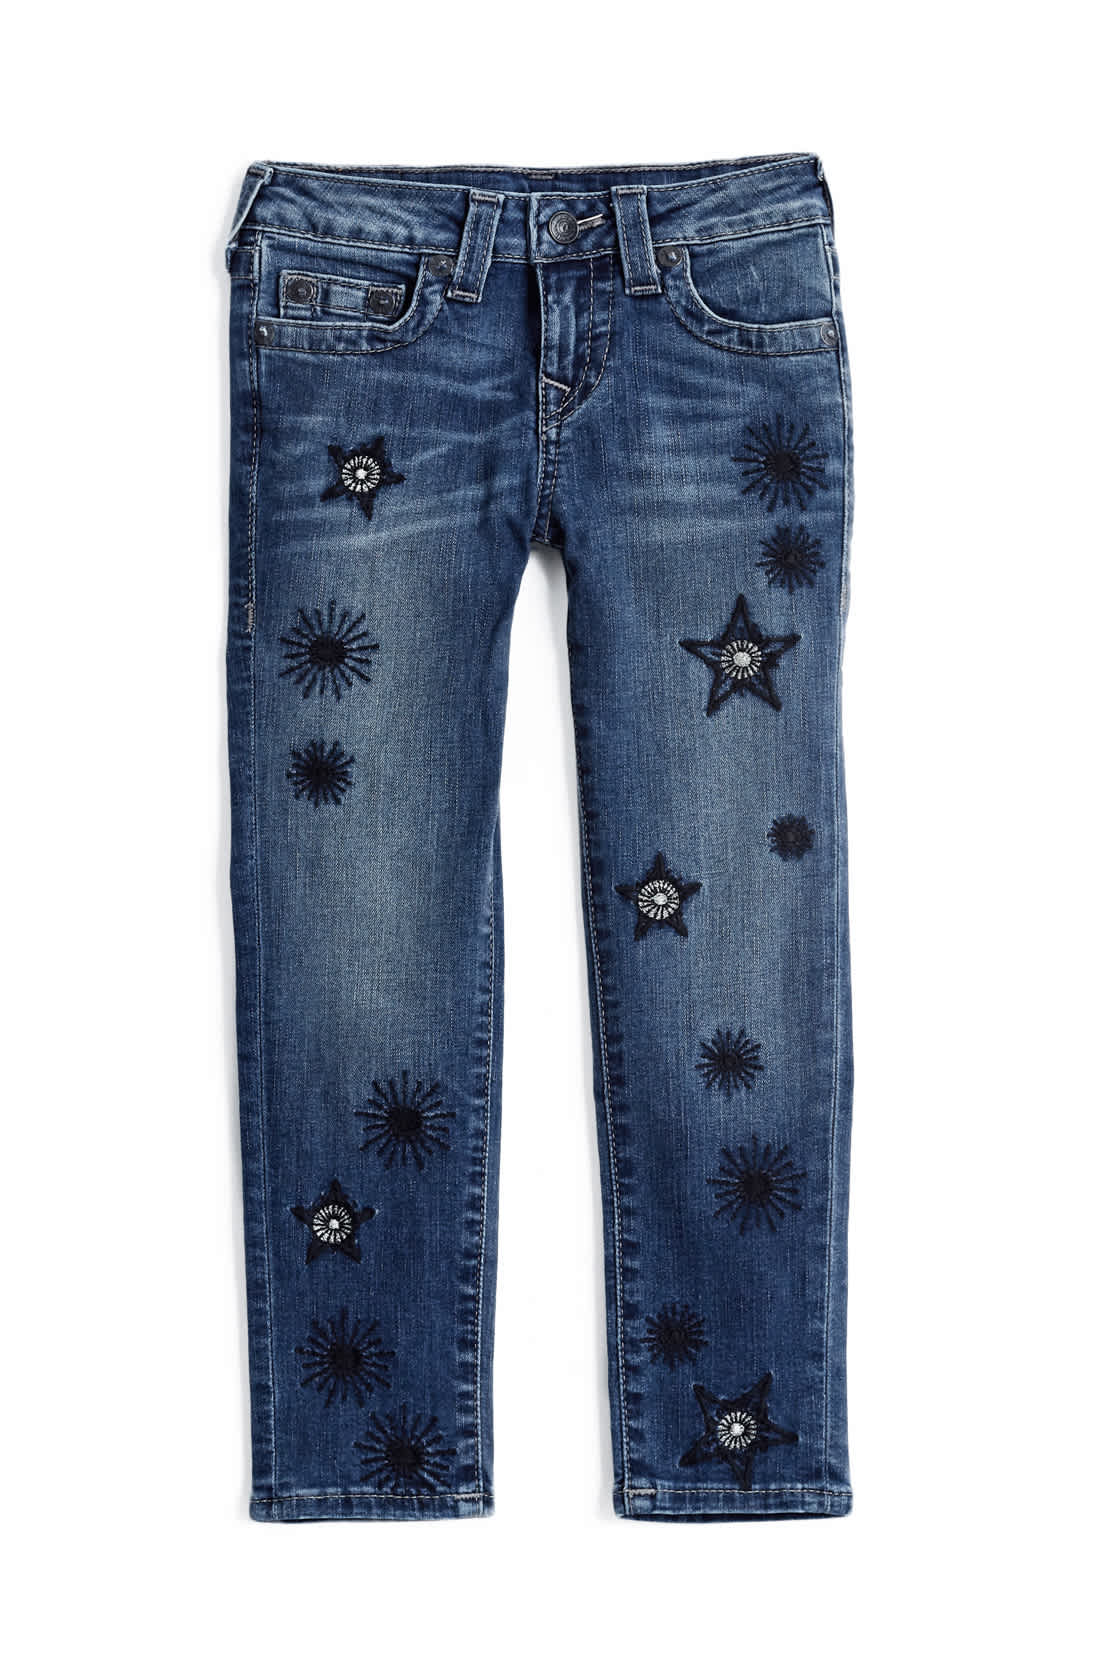 CASEY SKINNY EMBROIDERED KIDS JEAN